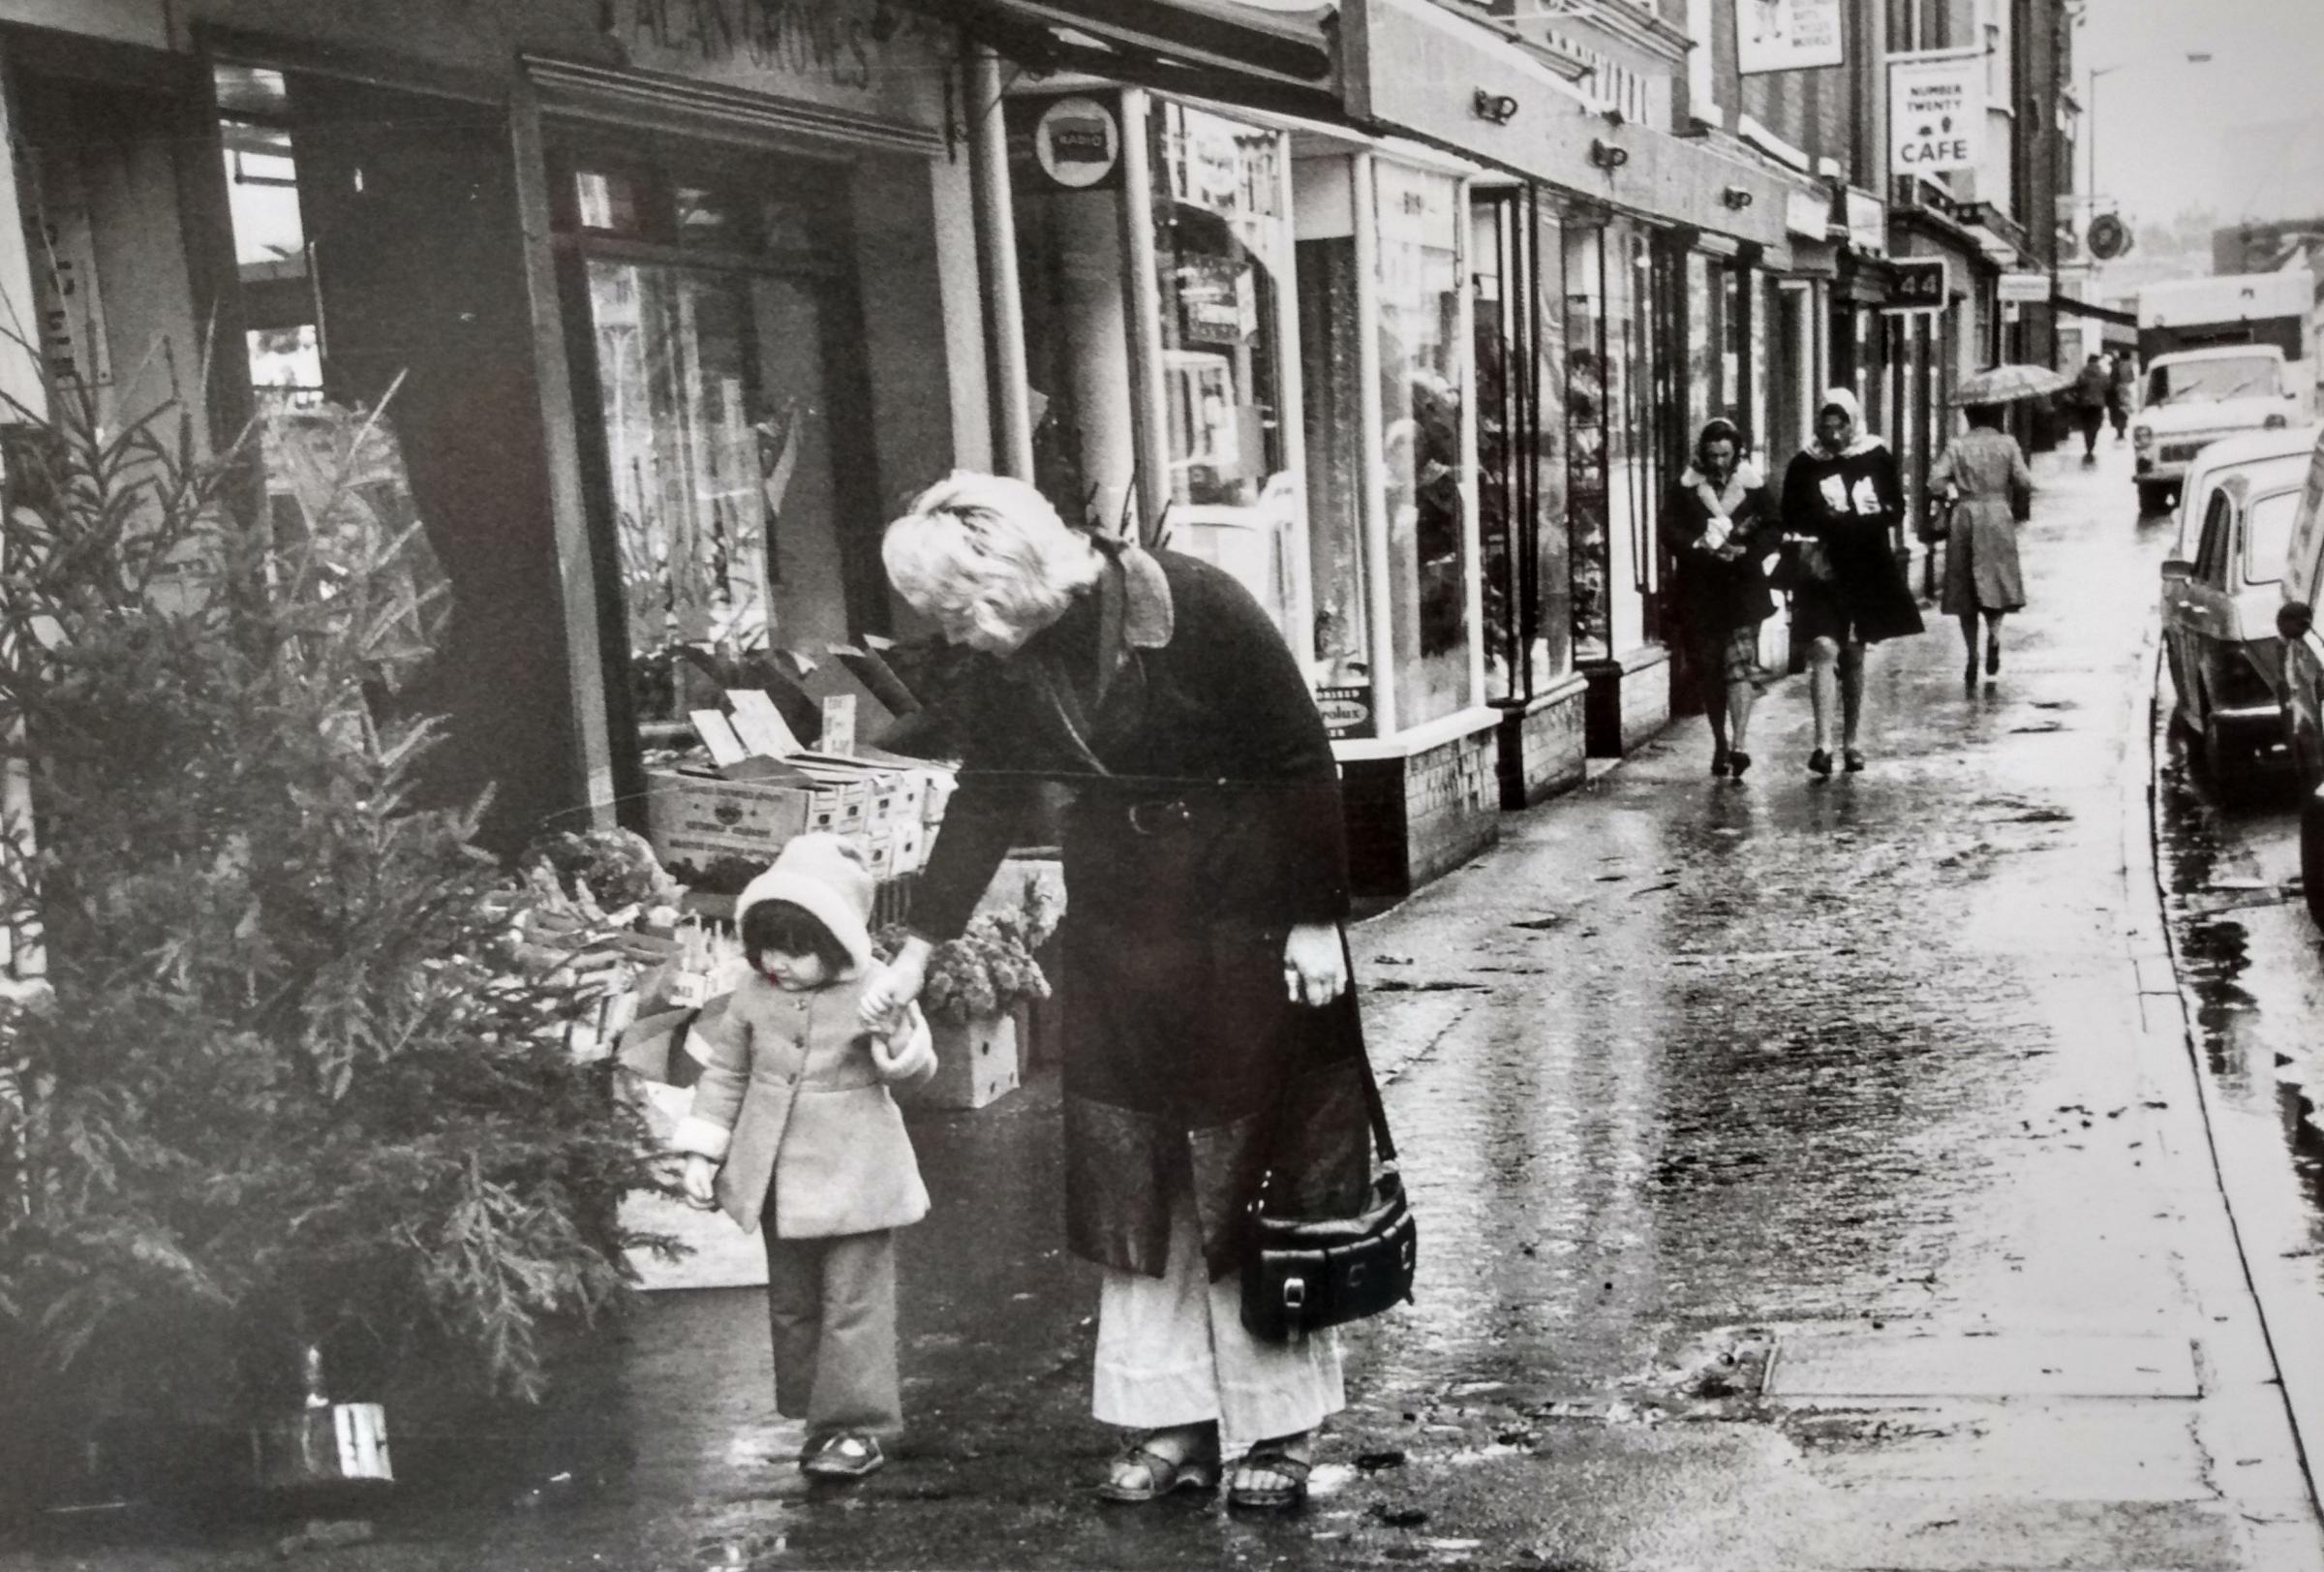 Late November 1976 and Christmas shopping is proving a damp affair - bit early to be putting the tree up